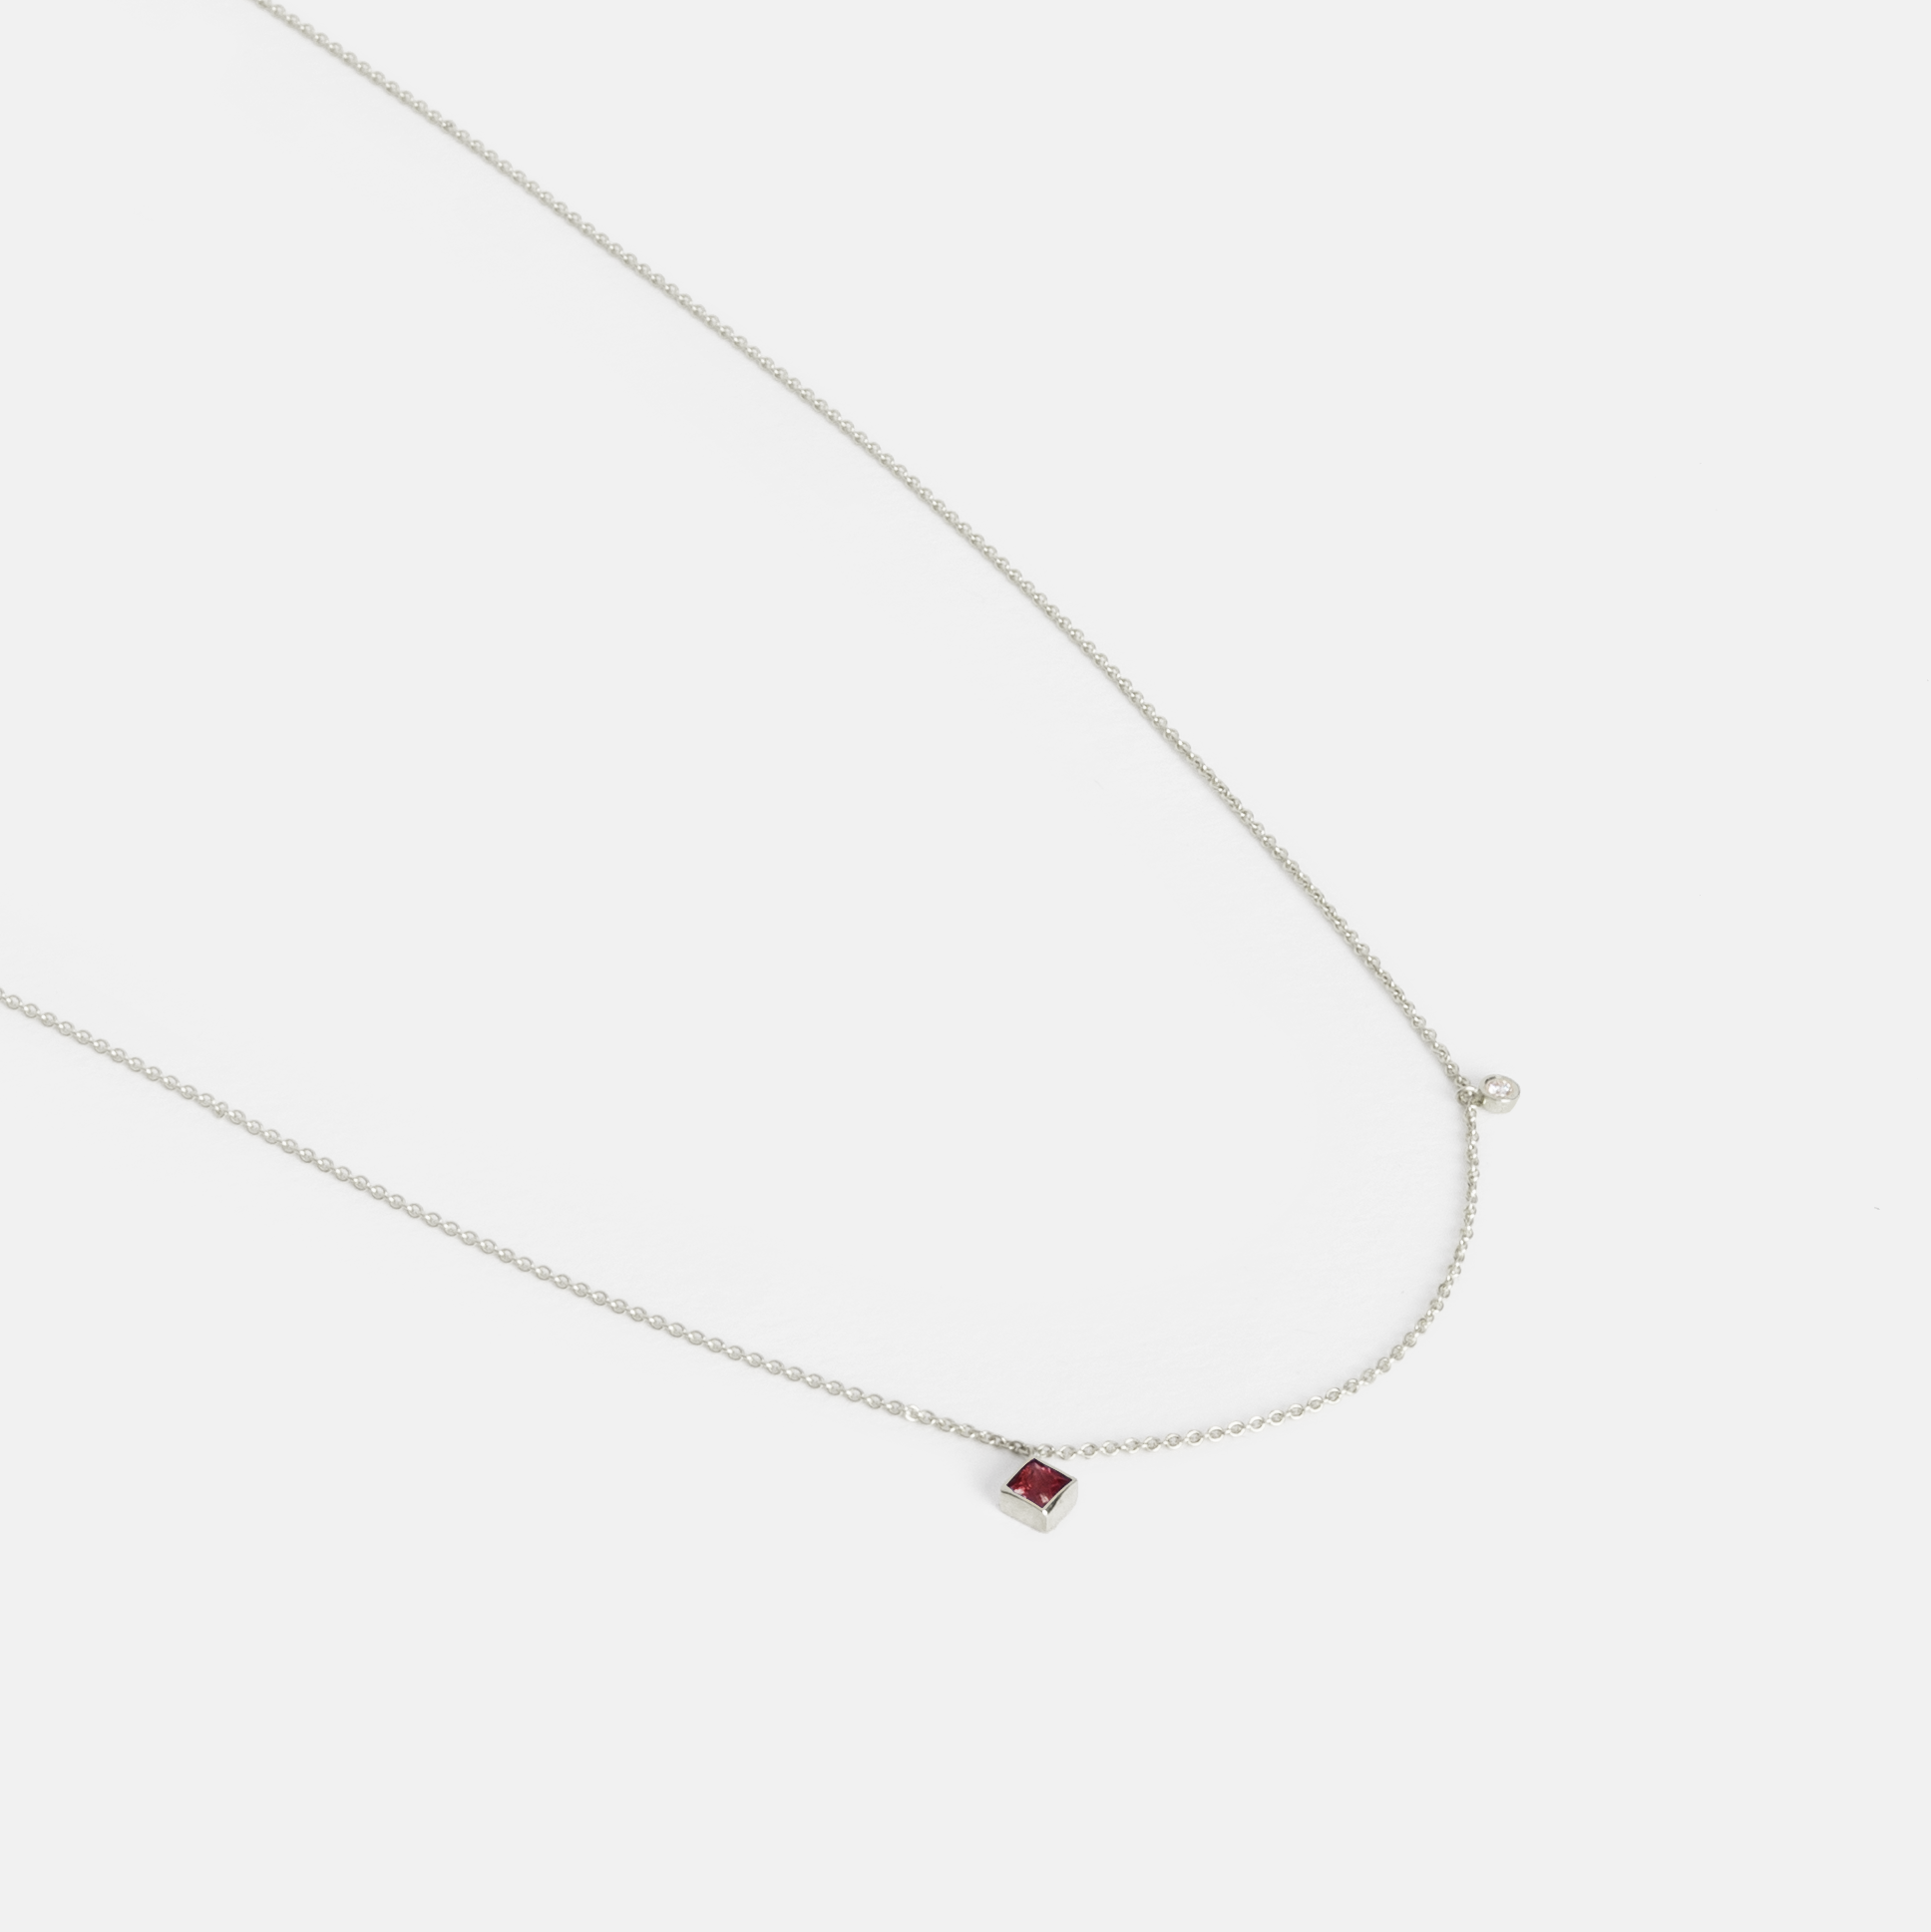  Ibi Thin Necklace in 14k White Gold set with Ruby and White Diamond By SHW Fine Jewelry NYC